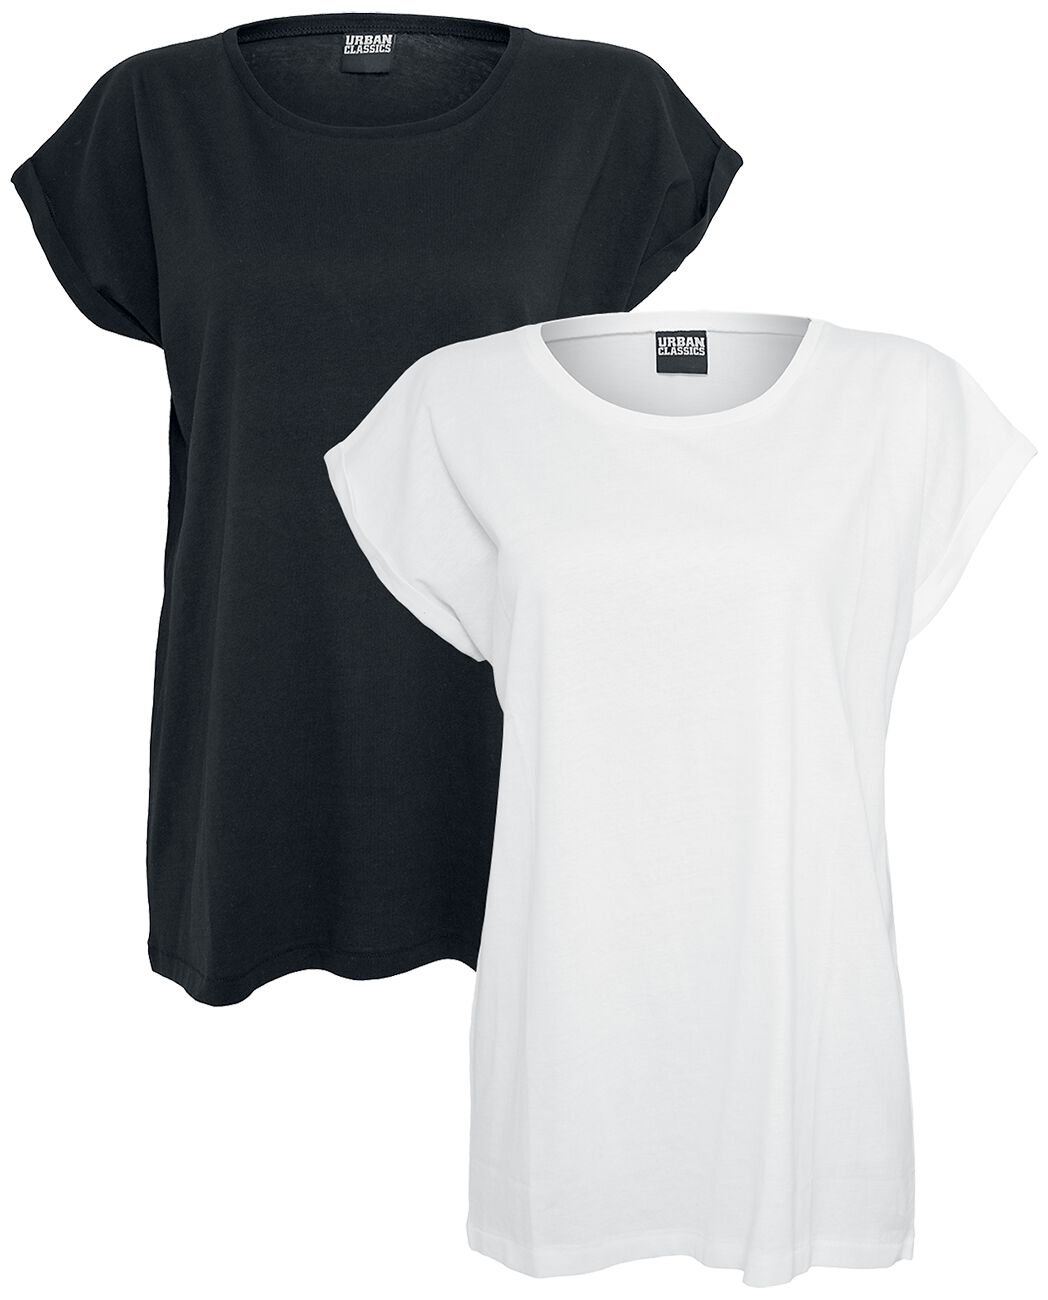 Image of T-Shirt di Urban Classics - Ladies Extended Shoulder Tee Double Pack - XS a XL - Donna - nero/bianco